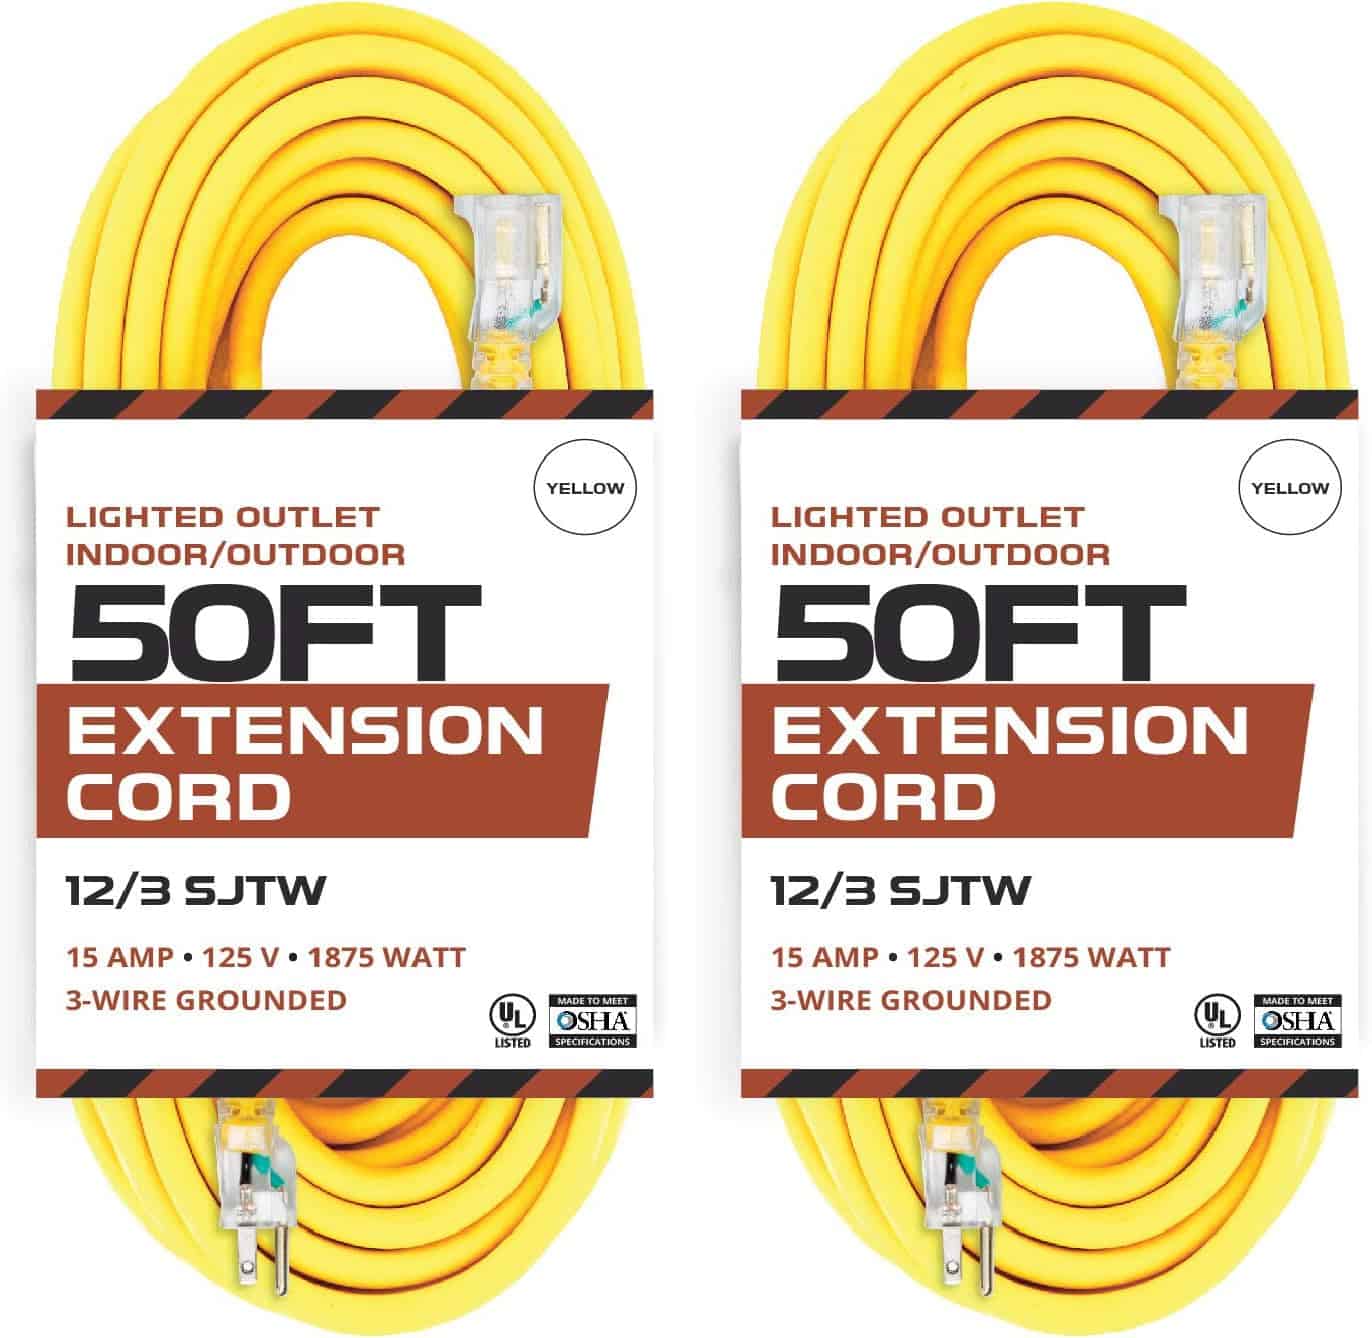 IRON-FORGE-CABLE-2-Pack-of-50-Ft-Outdoor-Extension-Cords-12-3-SJTW-Heavy-Duty-Yellow-3-Prong-Extension-Cable-15-AMP-Great-for-Garden-and-Major-Appliances